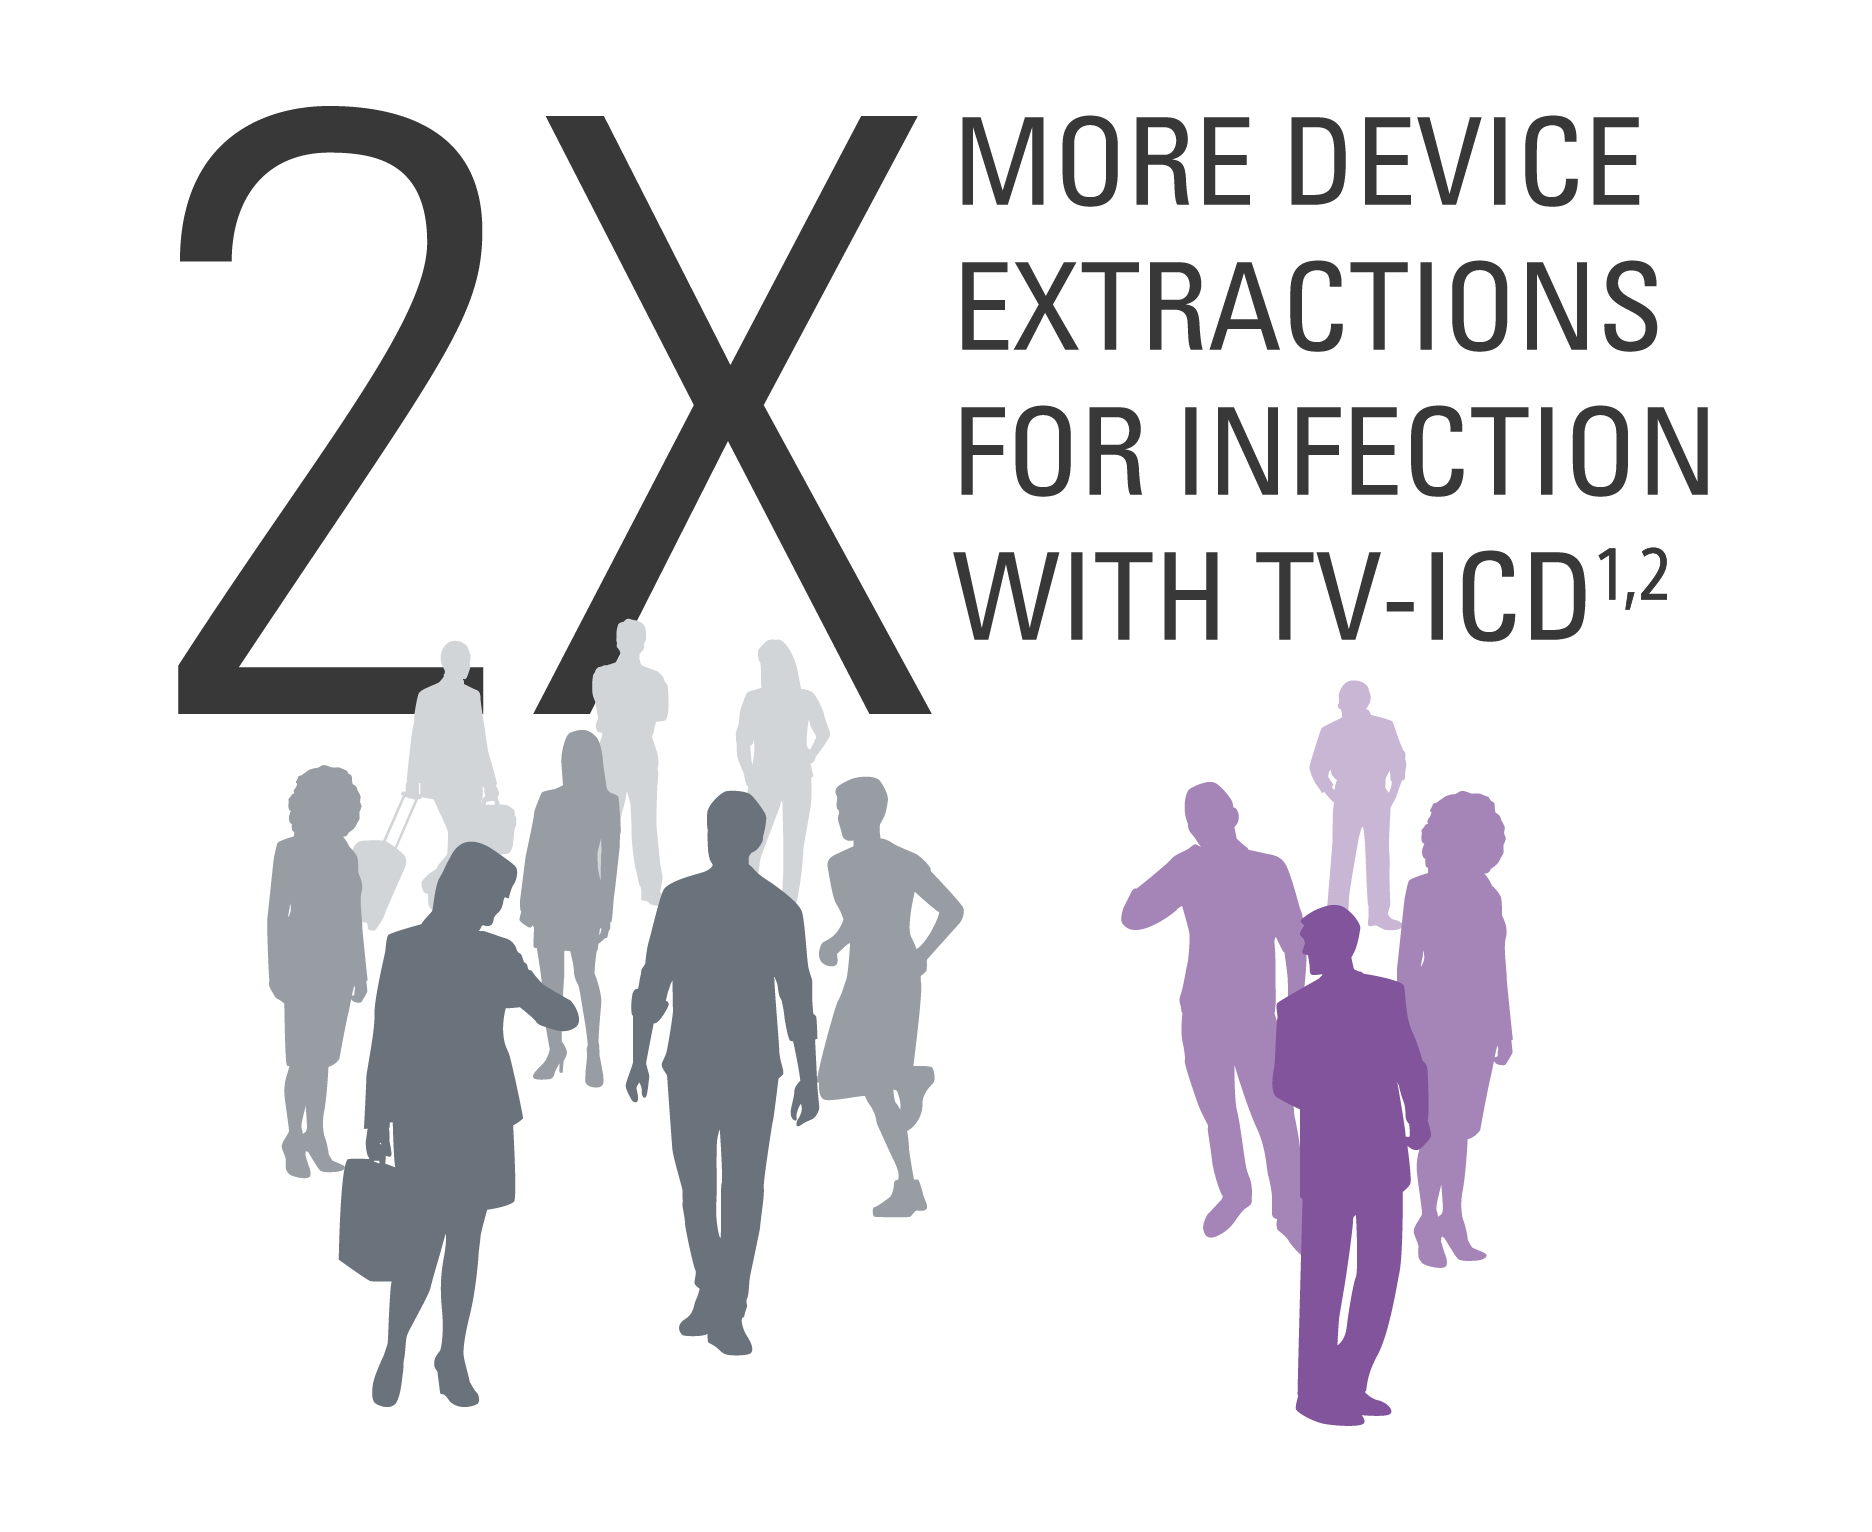 2 times more device extractions for infection with TV-ICD.
